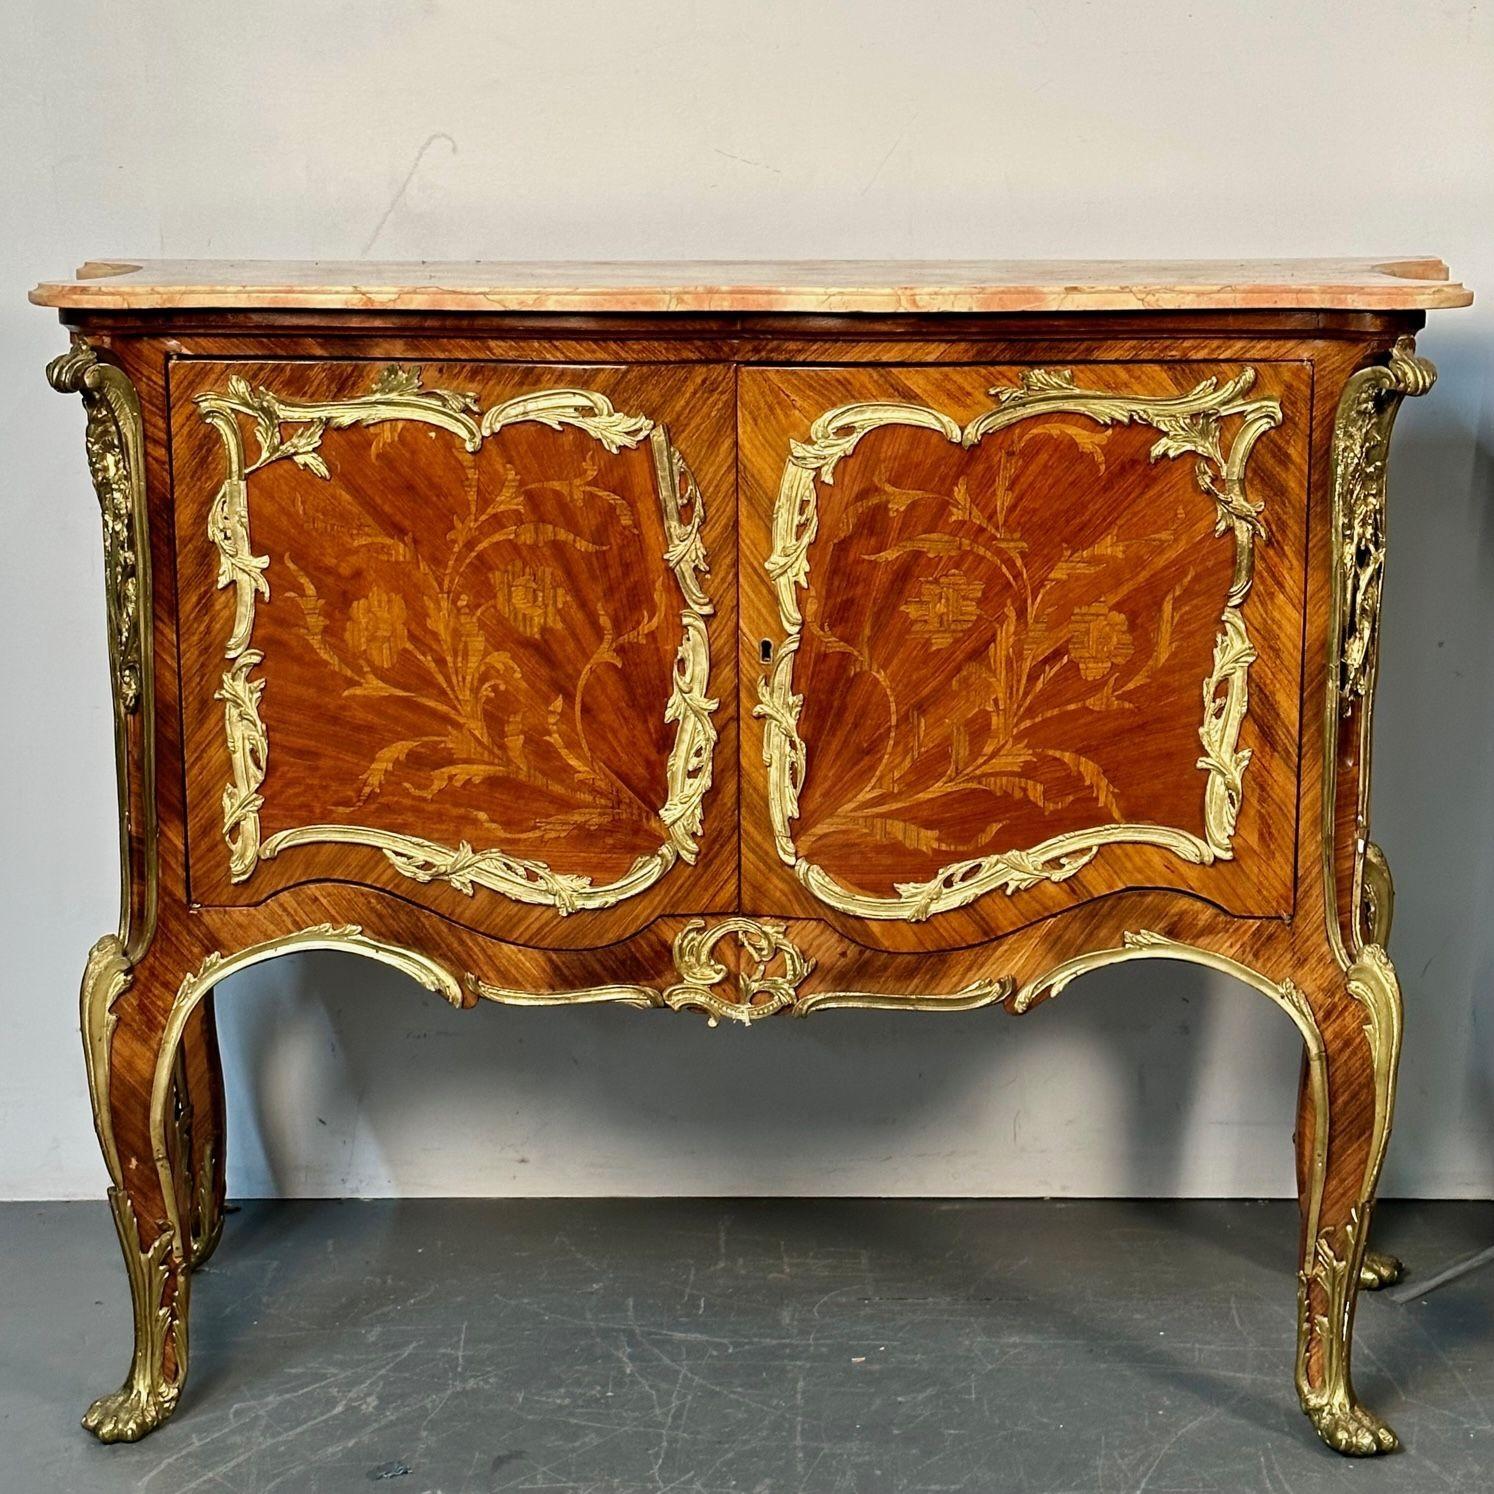 Pair of French Kingwood Bronze Mounted Commodes / Chest of Drawers, Nightstands In Good Condition For Sale In Stamford, CT